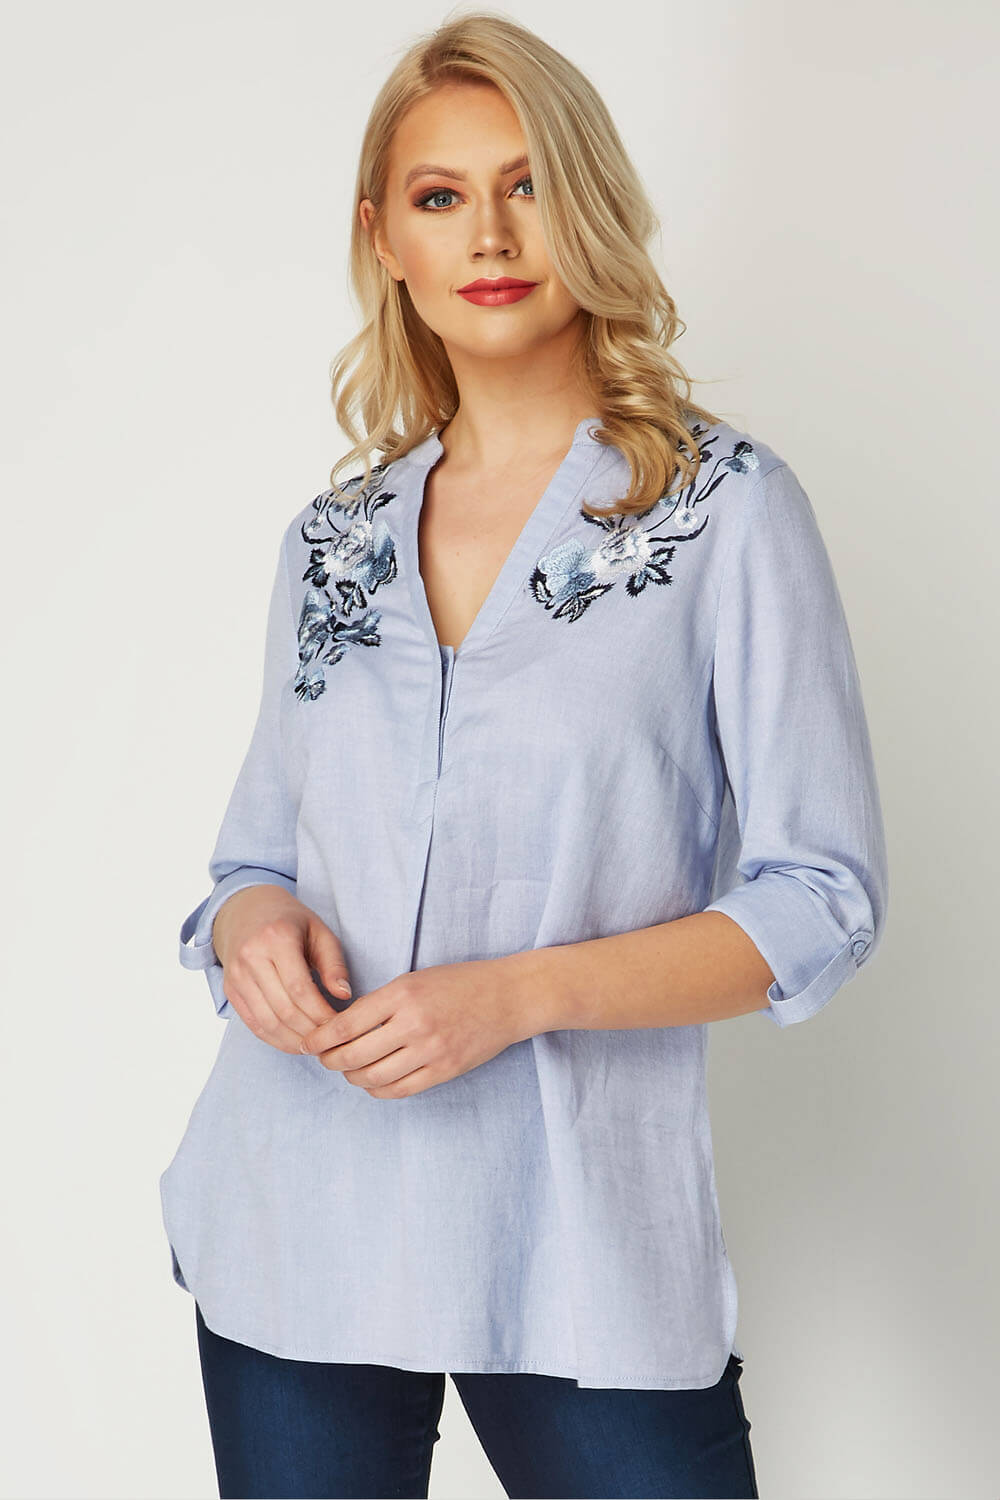 Floral Embroidered Shirt in Blue - Roman Originals UK